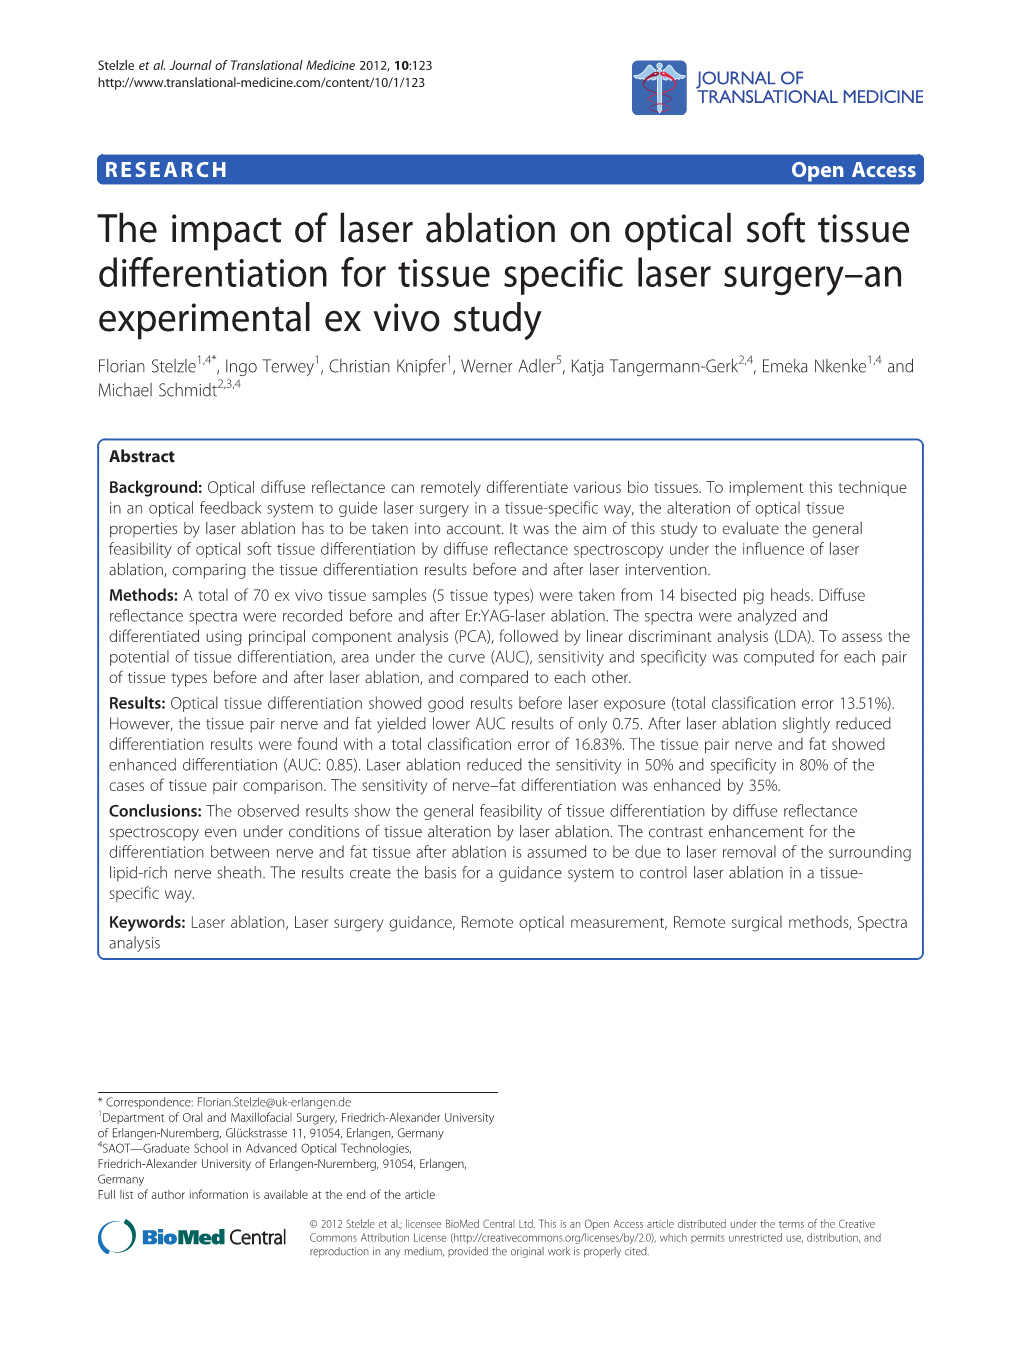 The Impact of Laser Ablation on Optical Soft Tissue Differentiation for Tissue